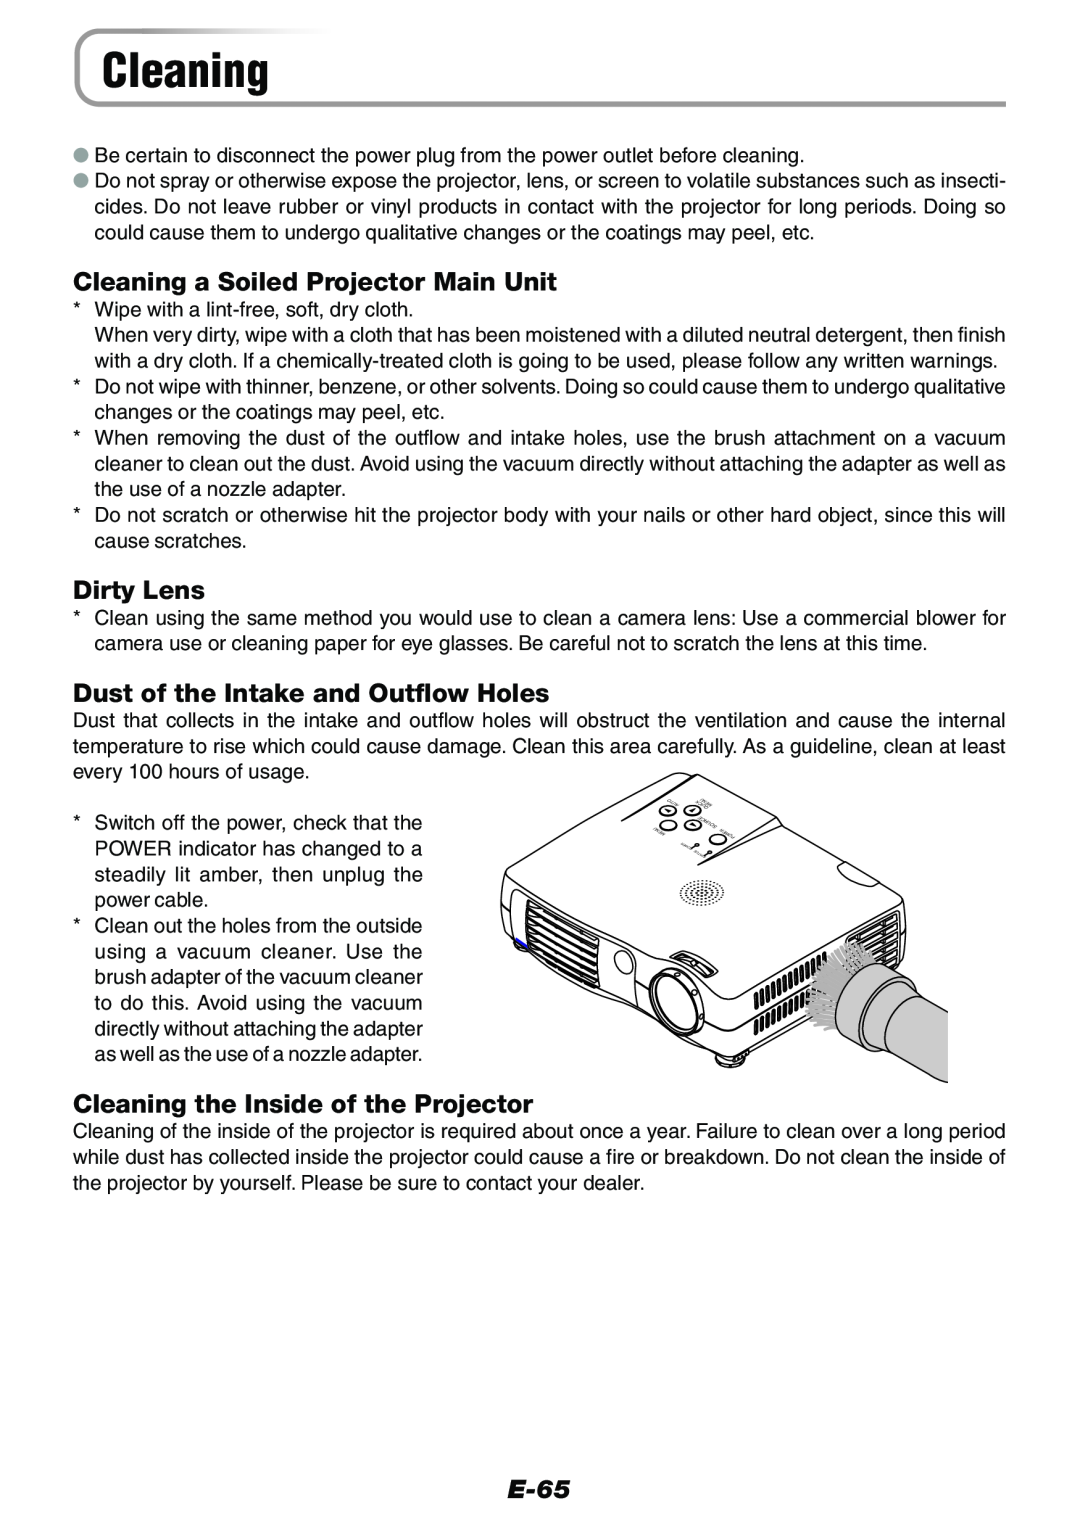 Epson V-1100 user manual Cleaning a Soiled Projector Main Unit, Dirty Lens, Dust of the Intake and Outflow Holes, E-65 